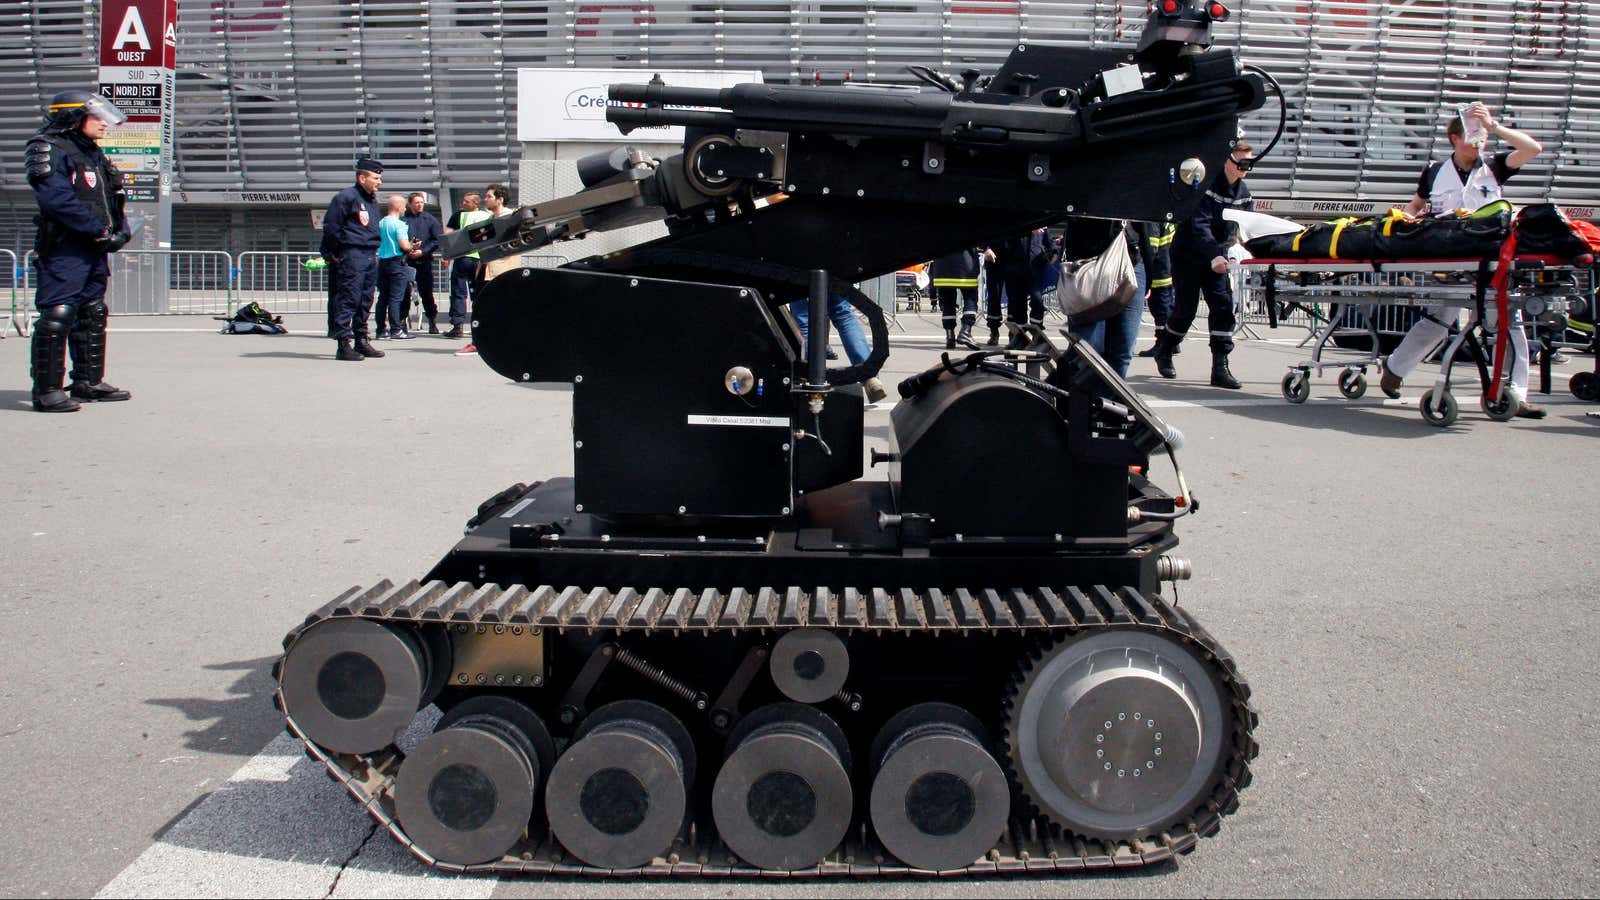 Activists are looking to change international law to ban killer robots.